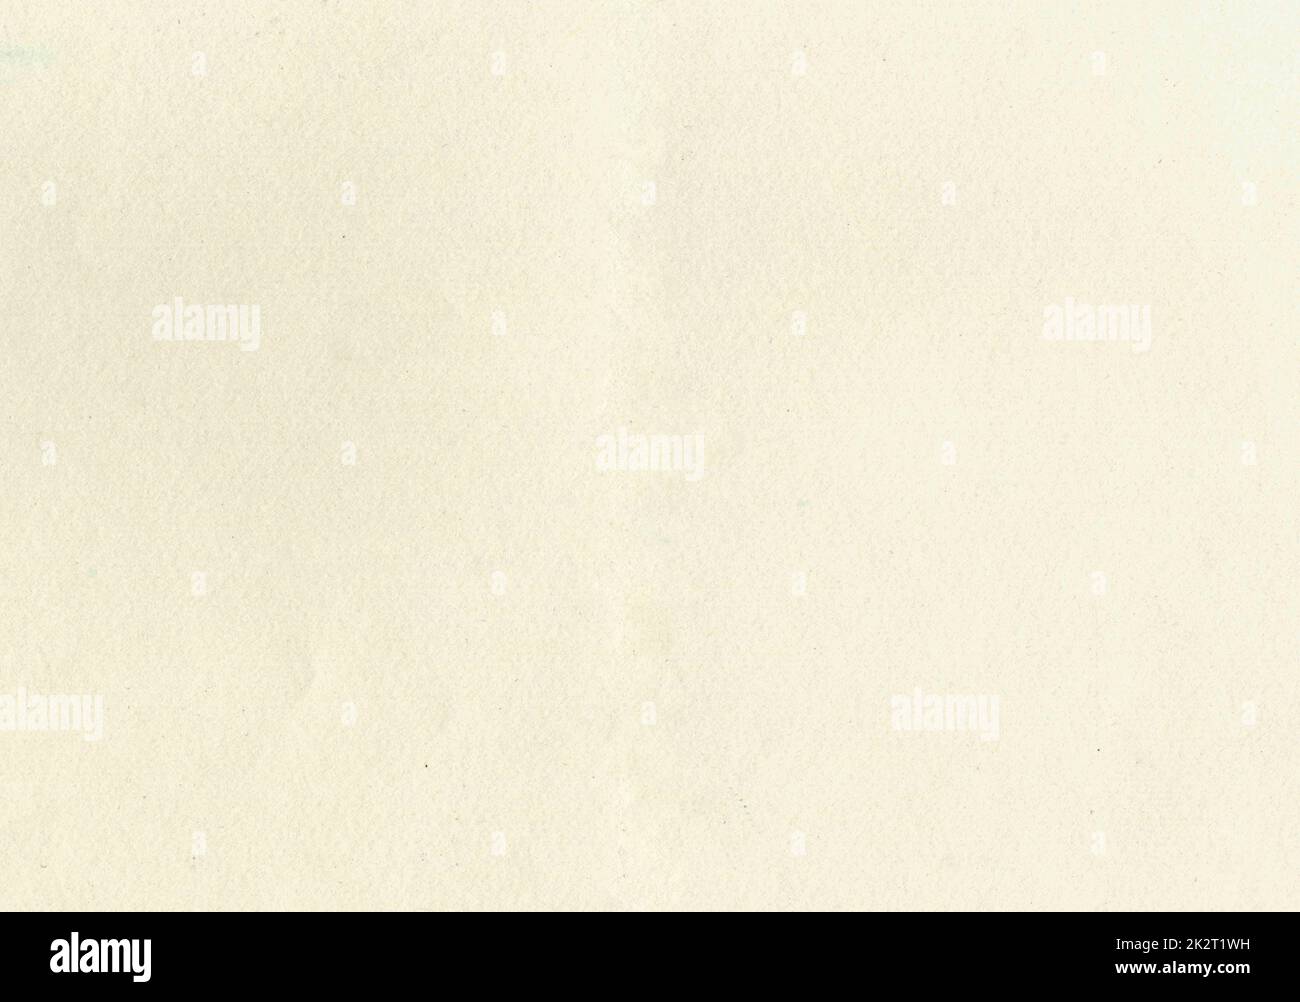 Large image paper texture background with aged uncoated fine fiber grain and dust particles sketch water color paper in light beige yellowed color smooth with copy space for text wallpapers or designs Stock Photo